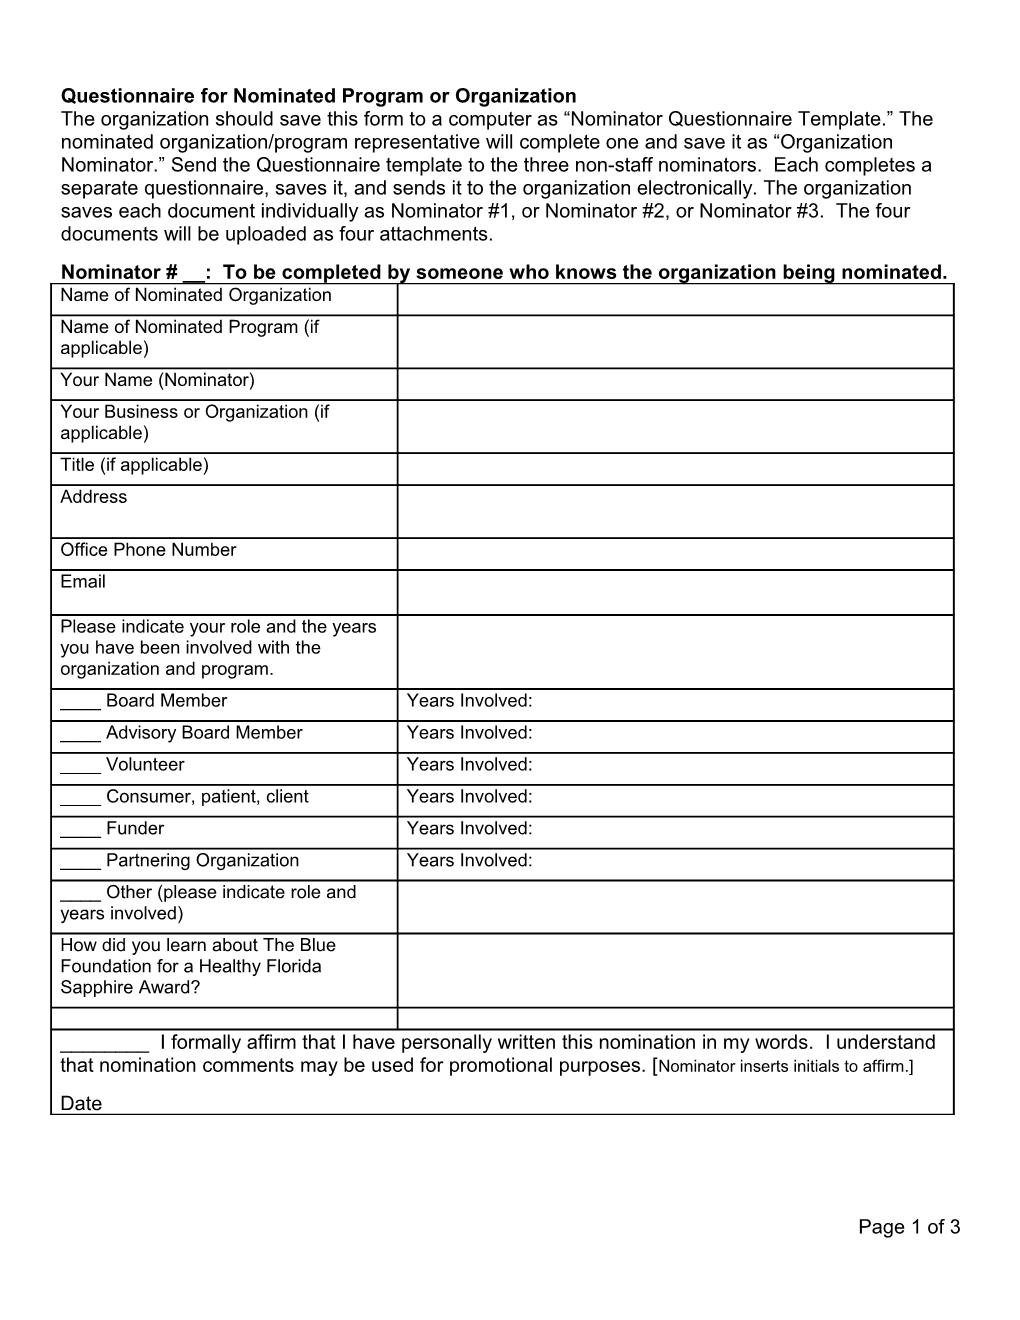 Questionnaire for Nominated Program Or Organization